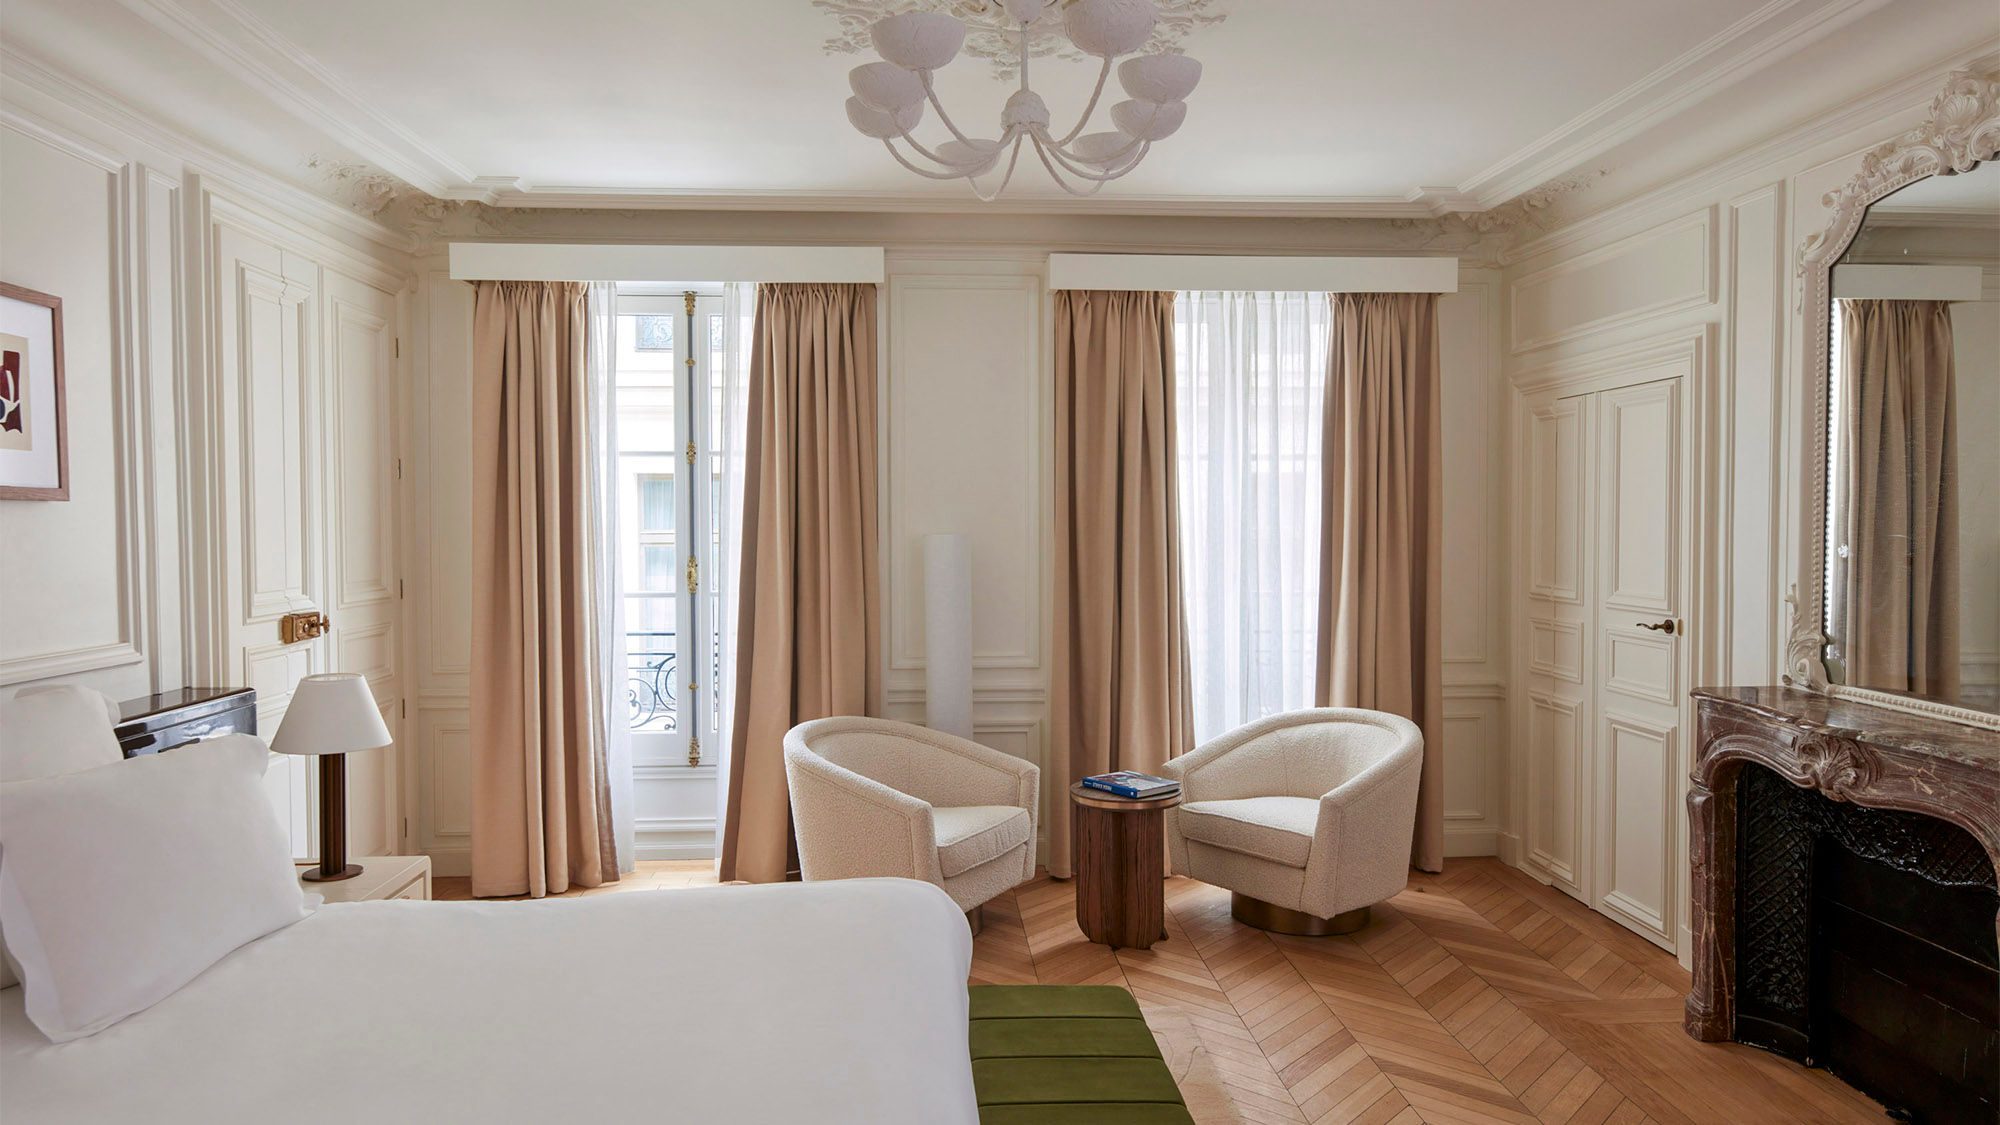 A guestroom at the 56-room Maison Delano Paris, which opened this month.